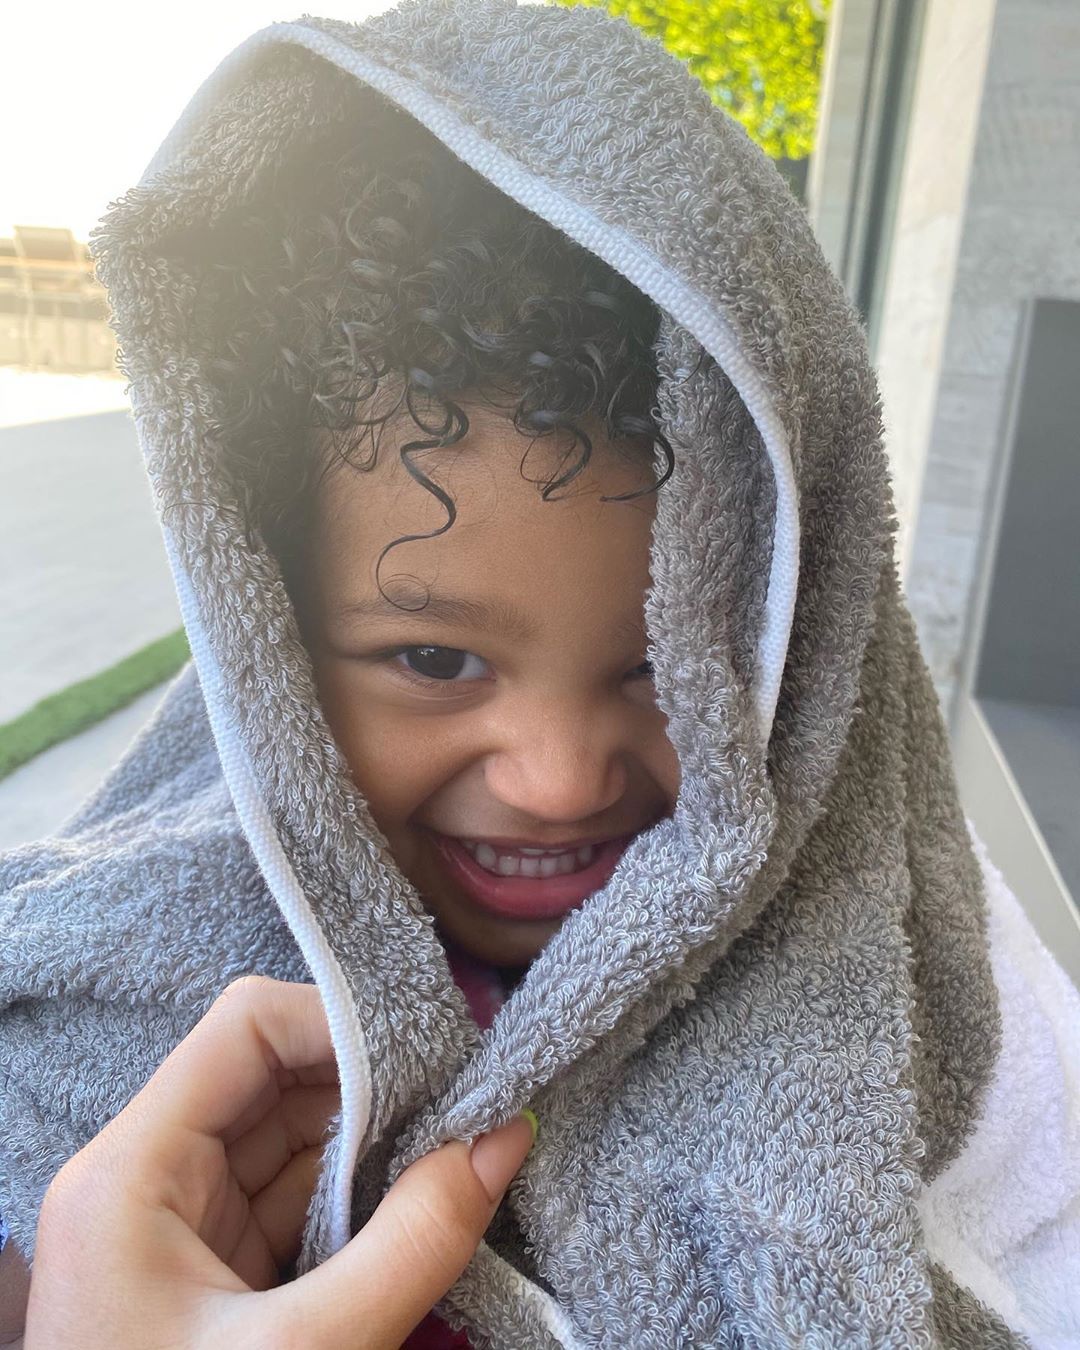 Stormi Webster Cutest Moments Wrapped in a Towel